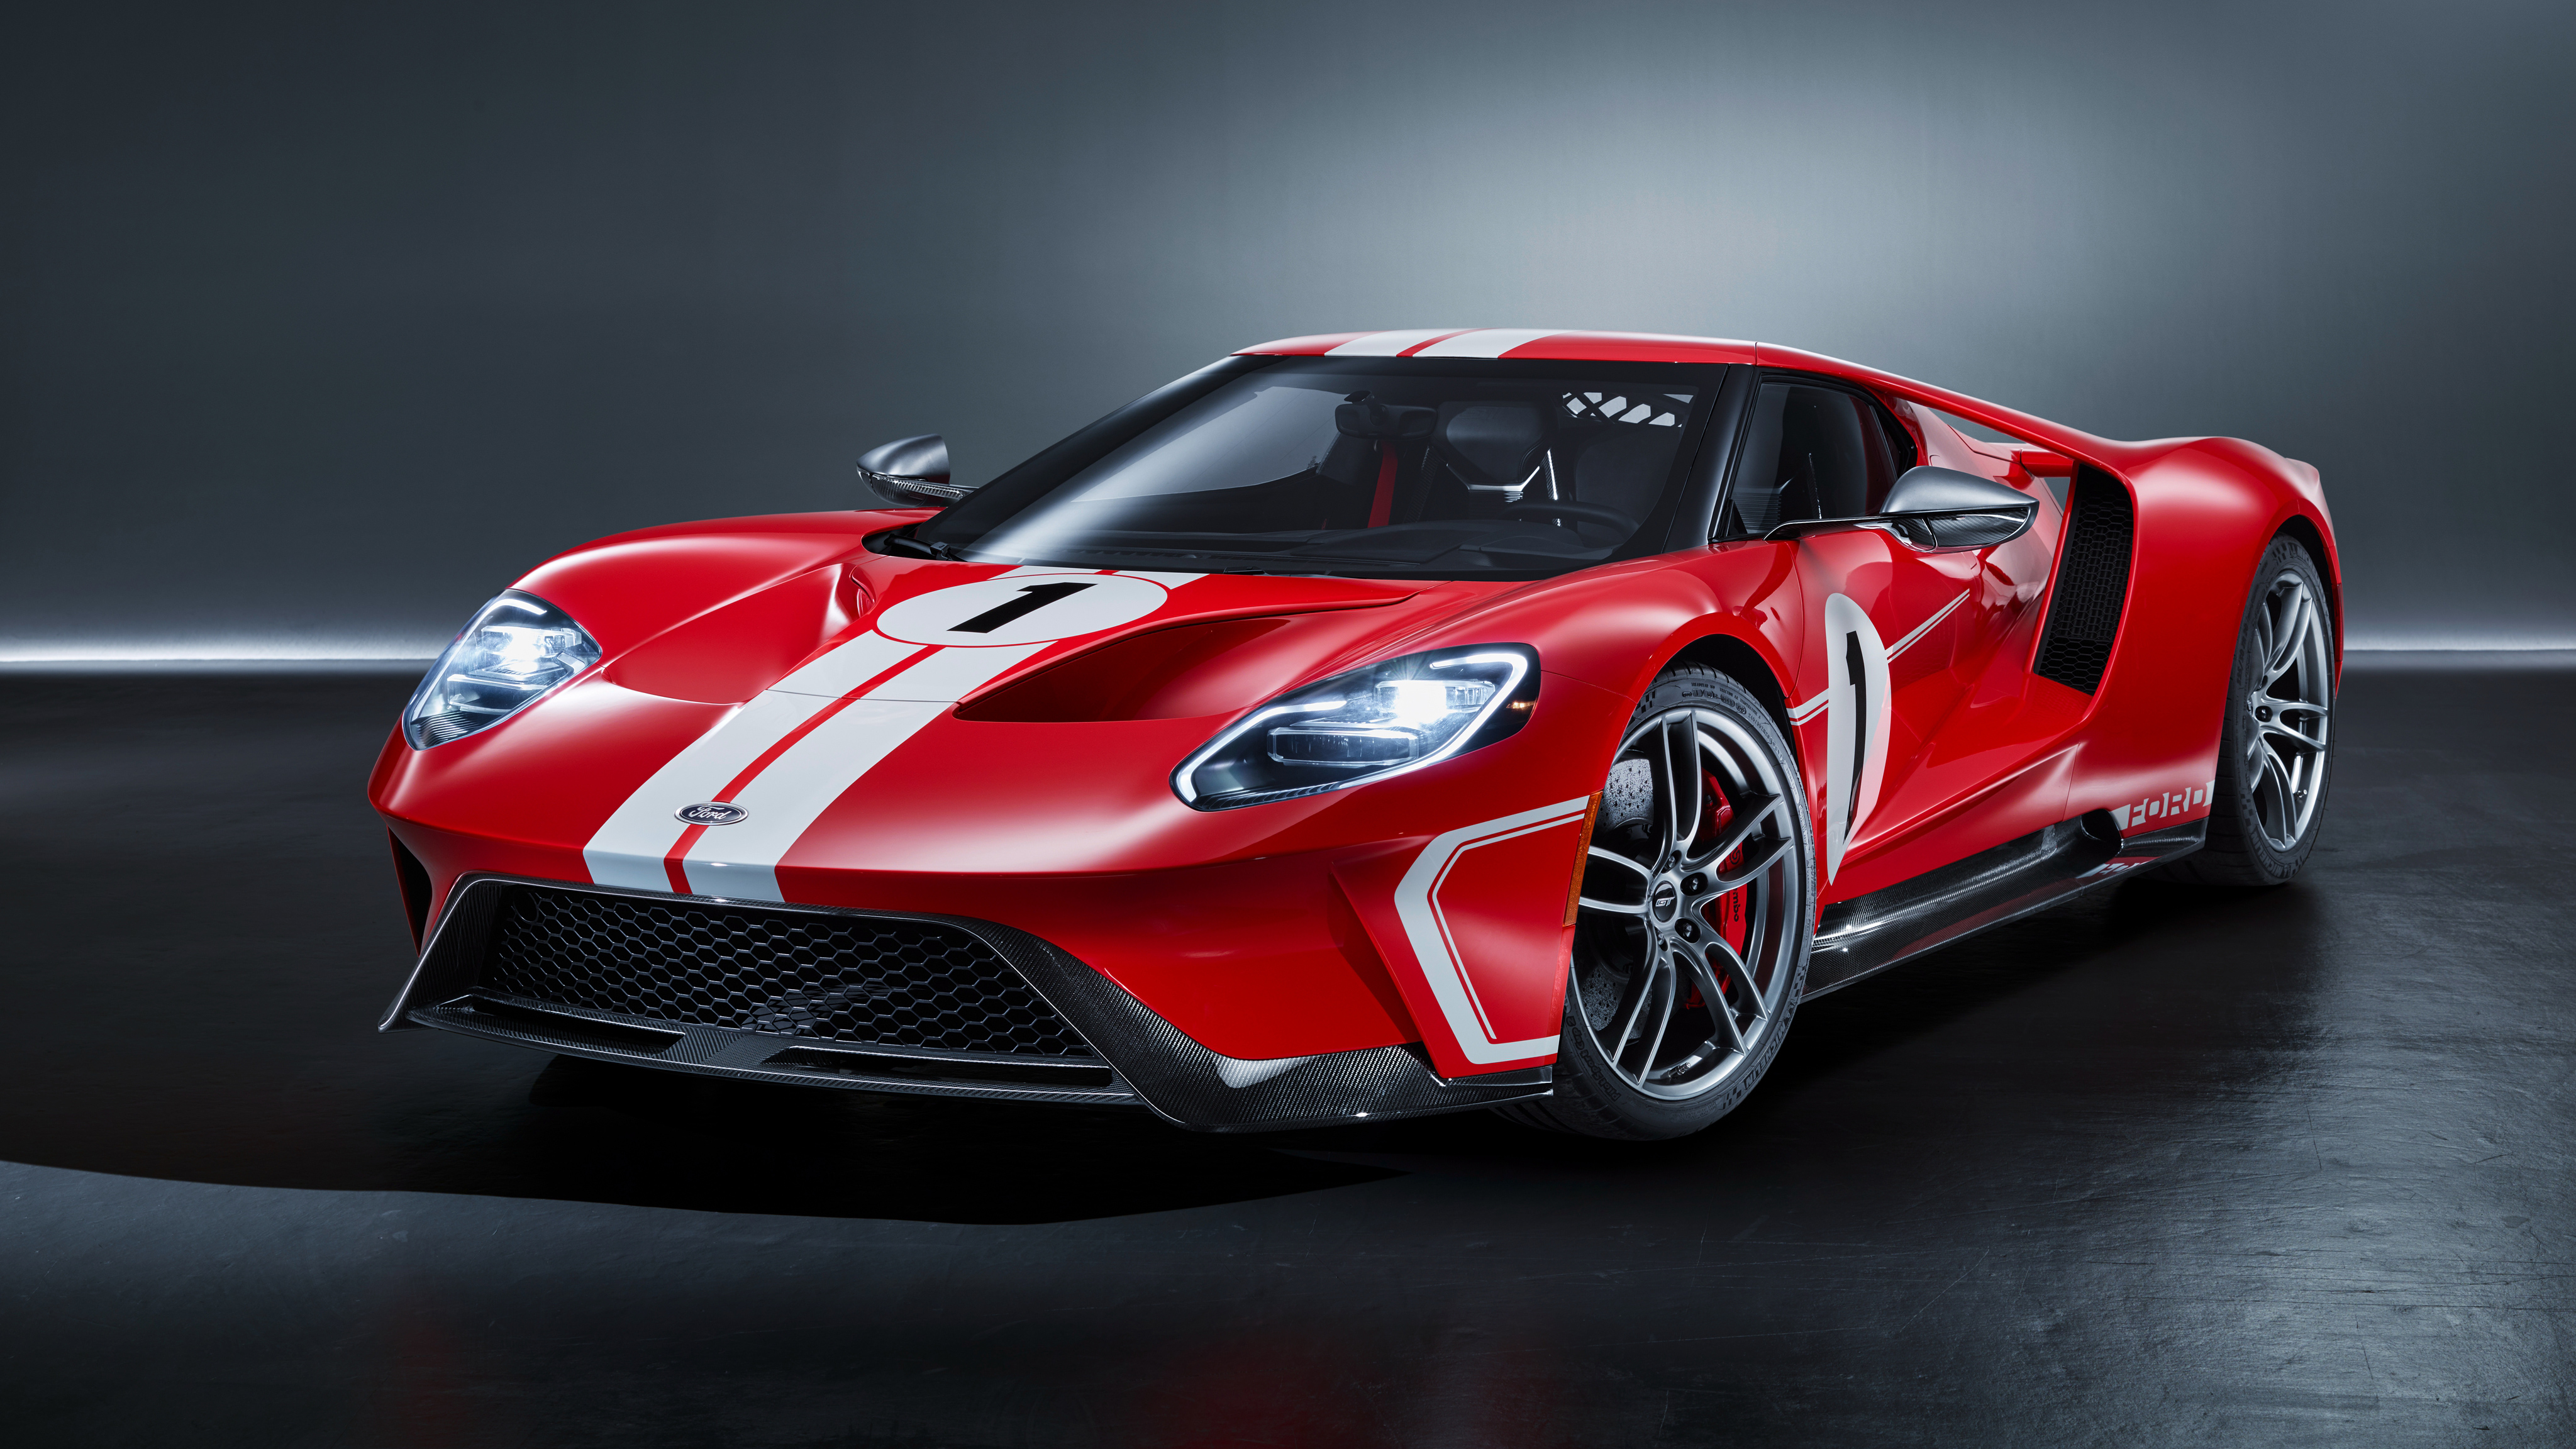 2018 Ford Gt 67 Heritage Edition 4k 3 Wallpaper Hd Car Wallpapers Id 8624